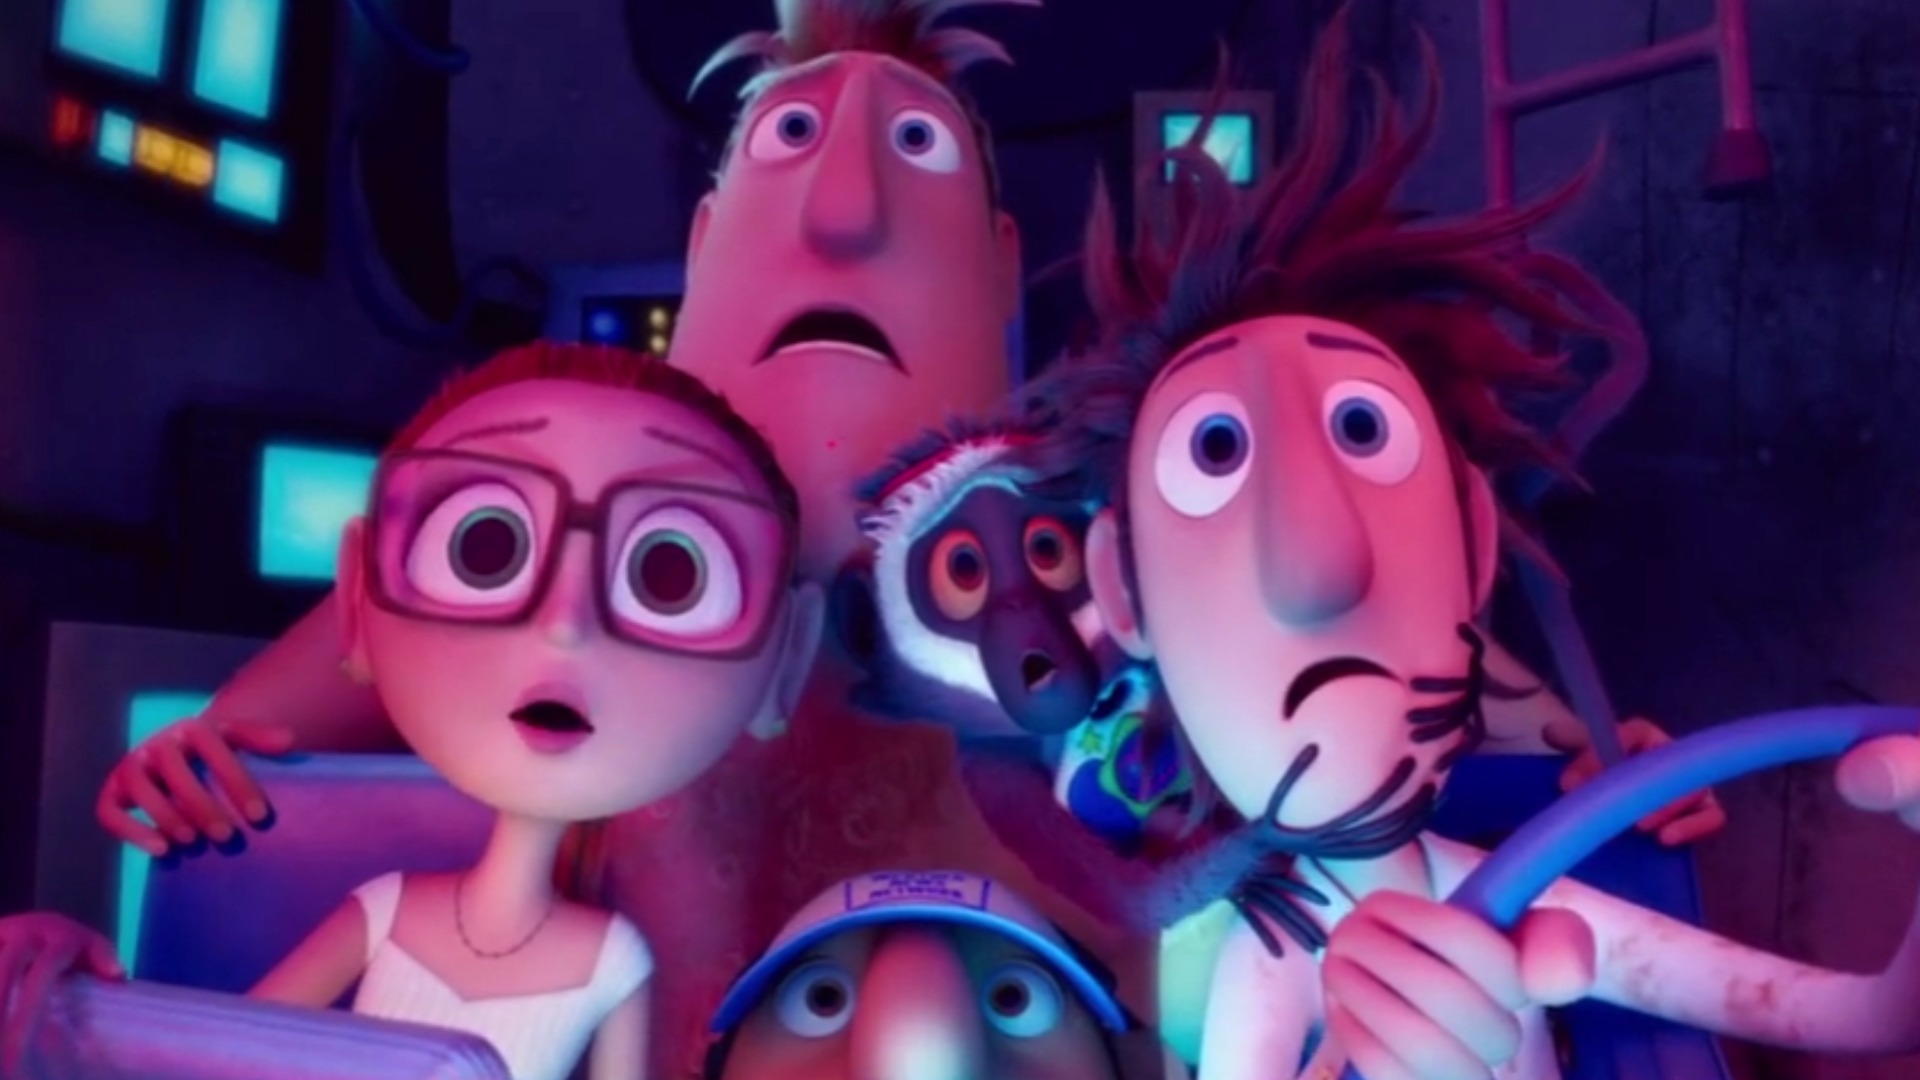 Cloudy With a Chance of Meatballs: Trailer 2 - Trailers & Videos ...